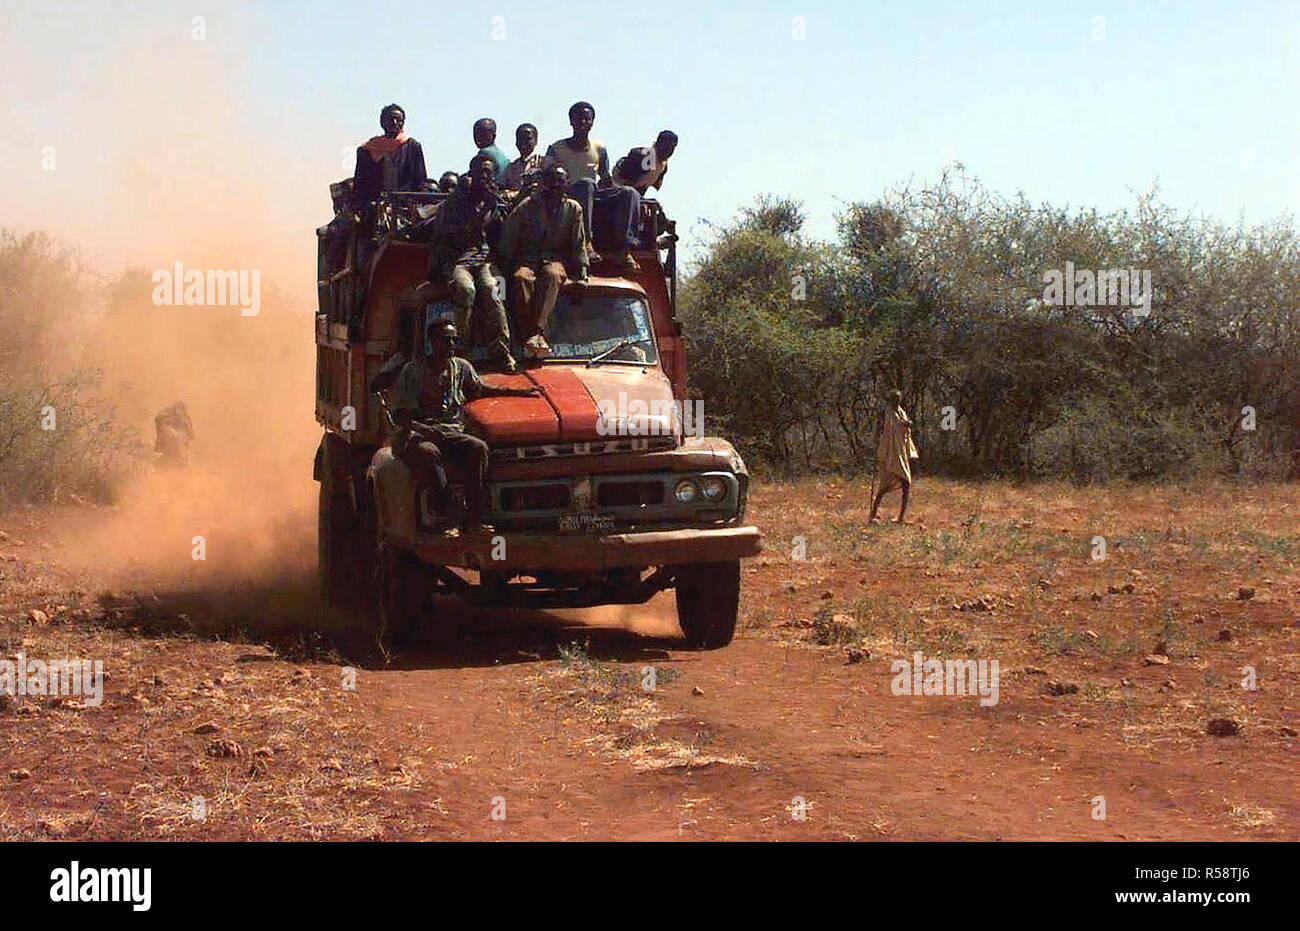 1993 - Straight on shot of a late model Isuzu dump truck loaded with Somali men.  One man rides on the right front fender while two others ride on the top of the truck's cab.  They are from the village of Maleel and are arriving at the landing zone where bags of wheat are being delivered (not shown).  This mission is in direct support of Operation Restore Hope. Stock Photo